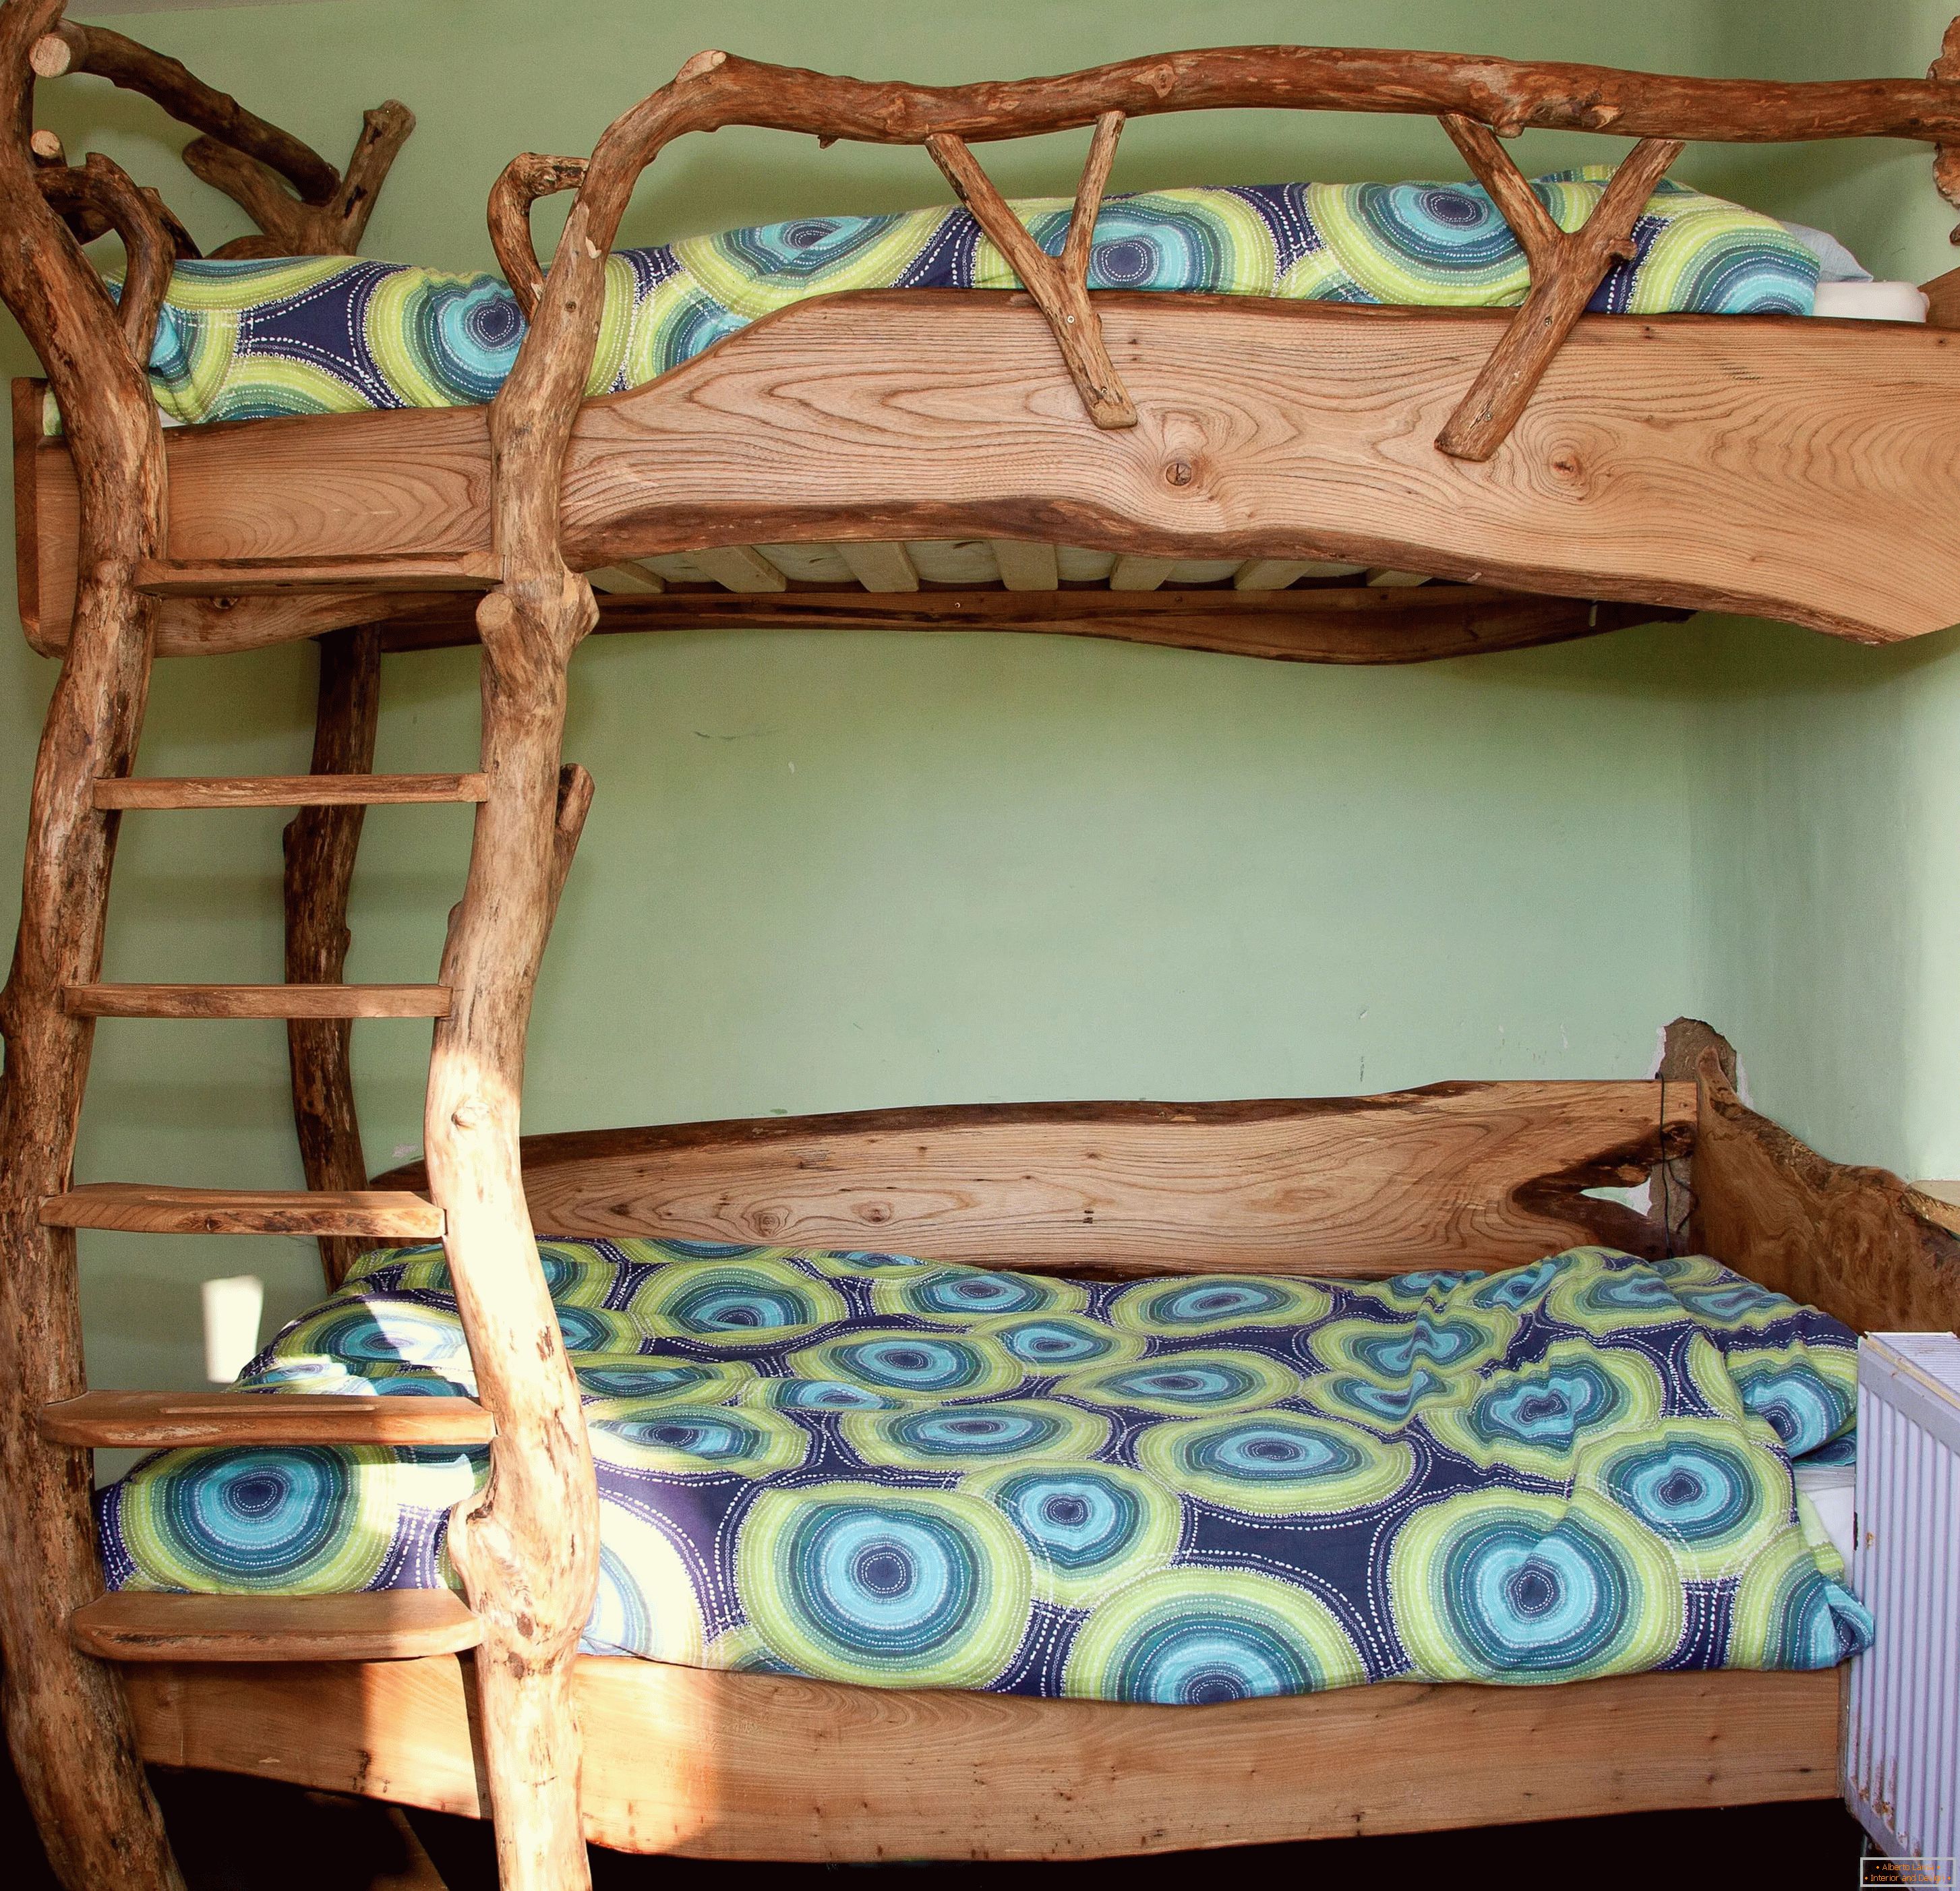 An unusual bunk bed